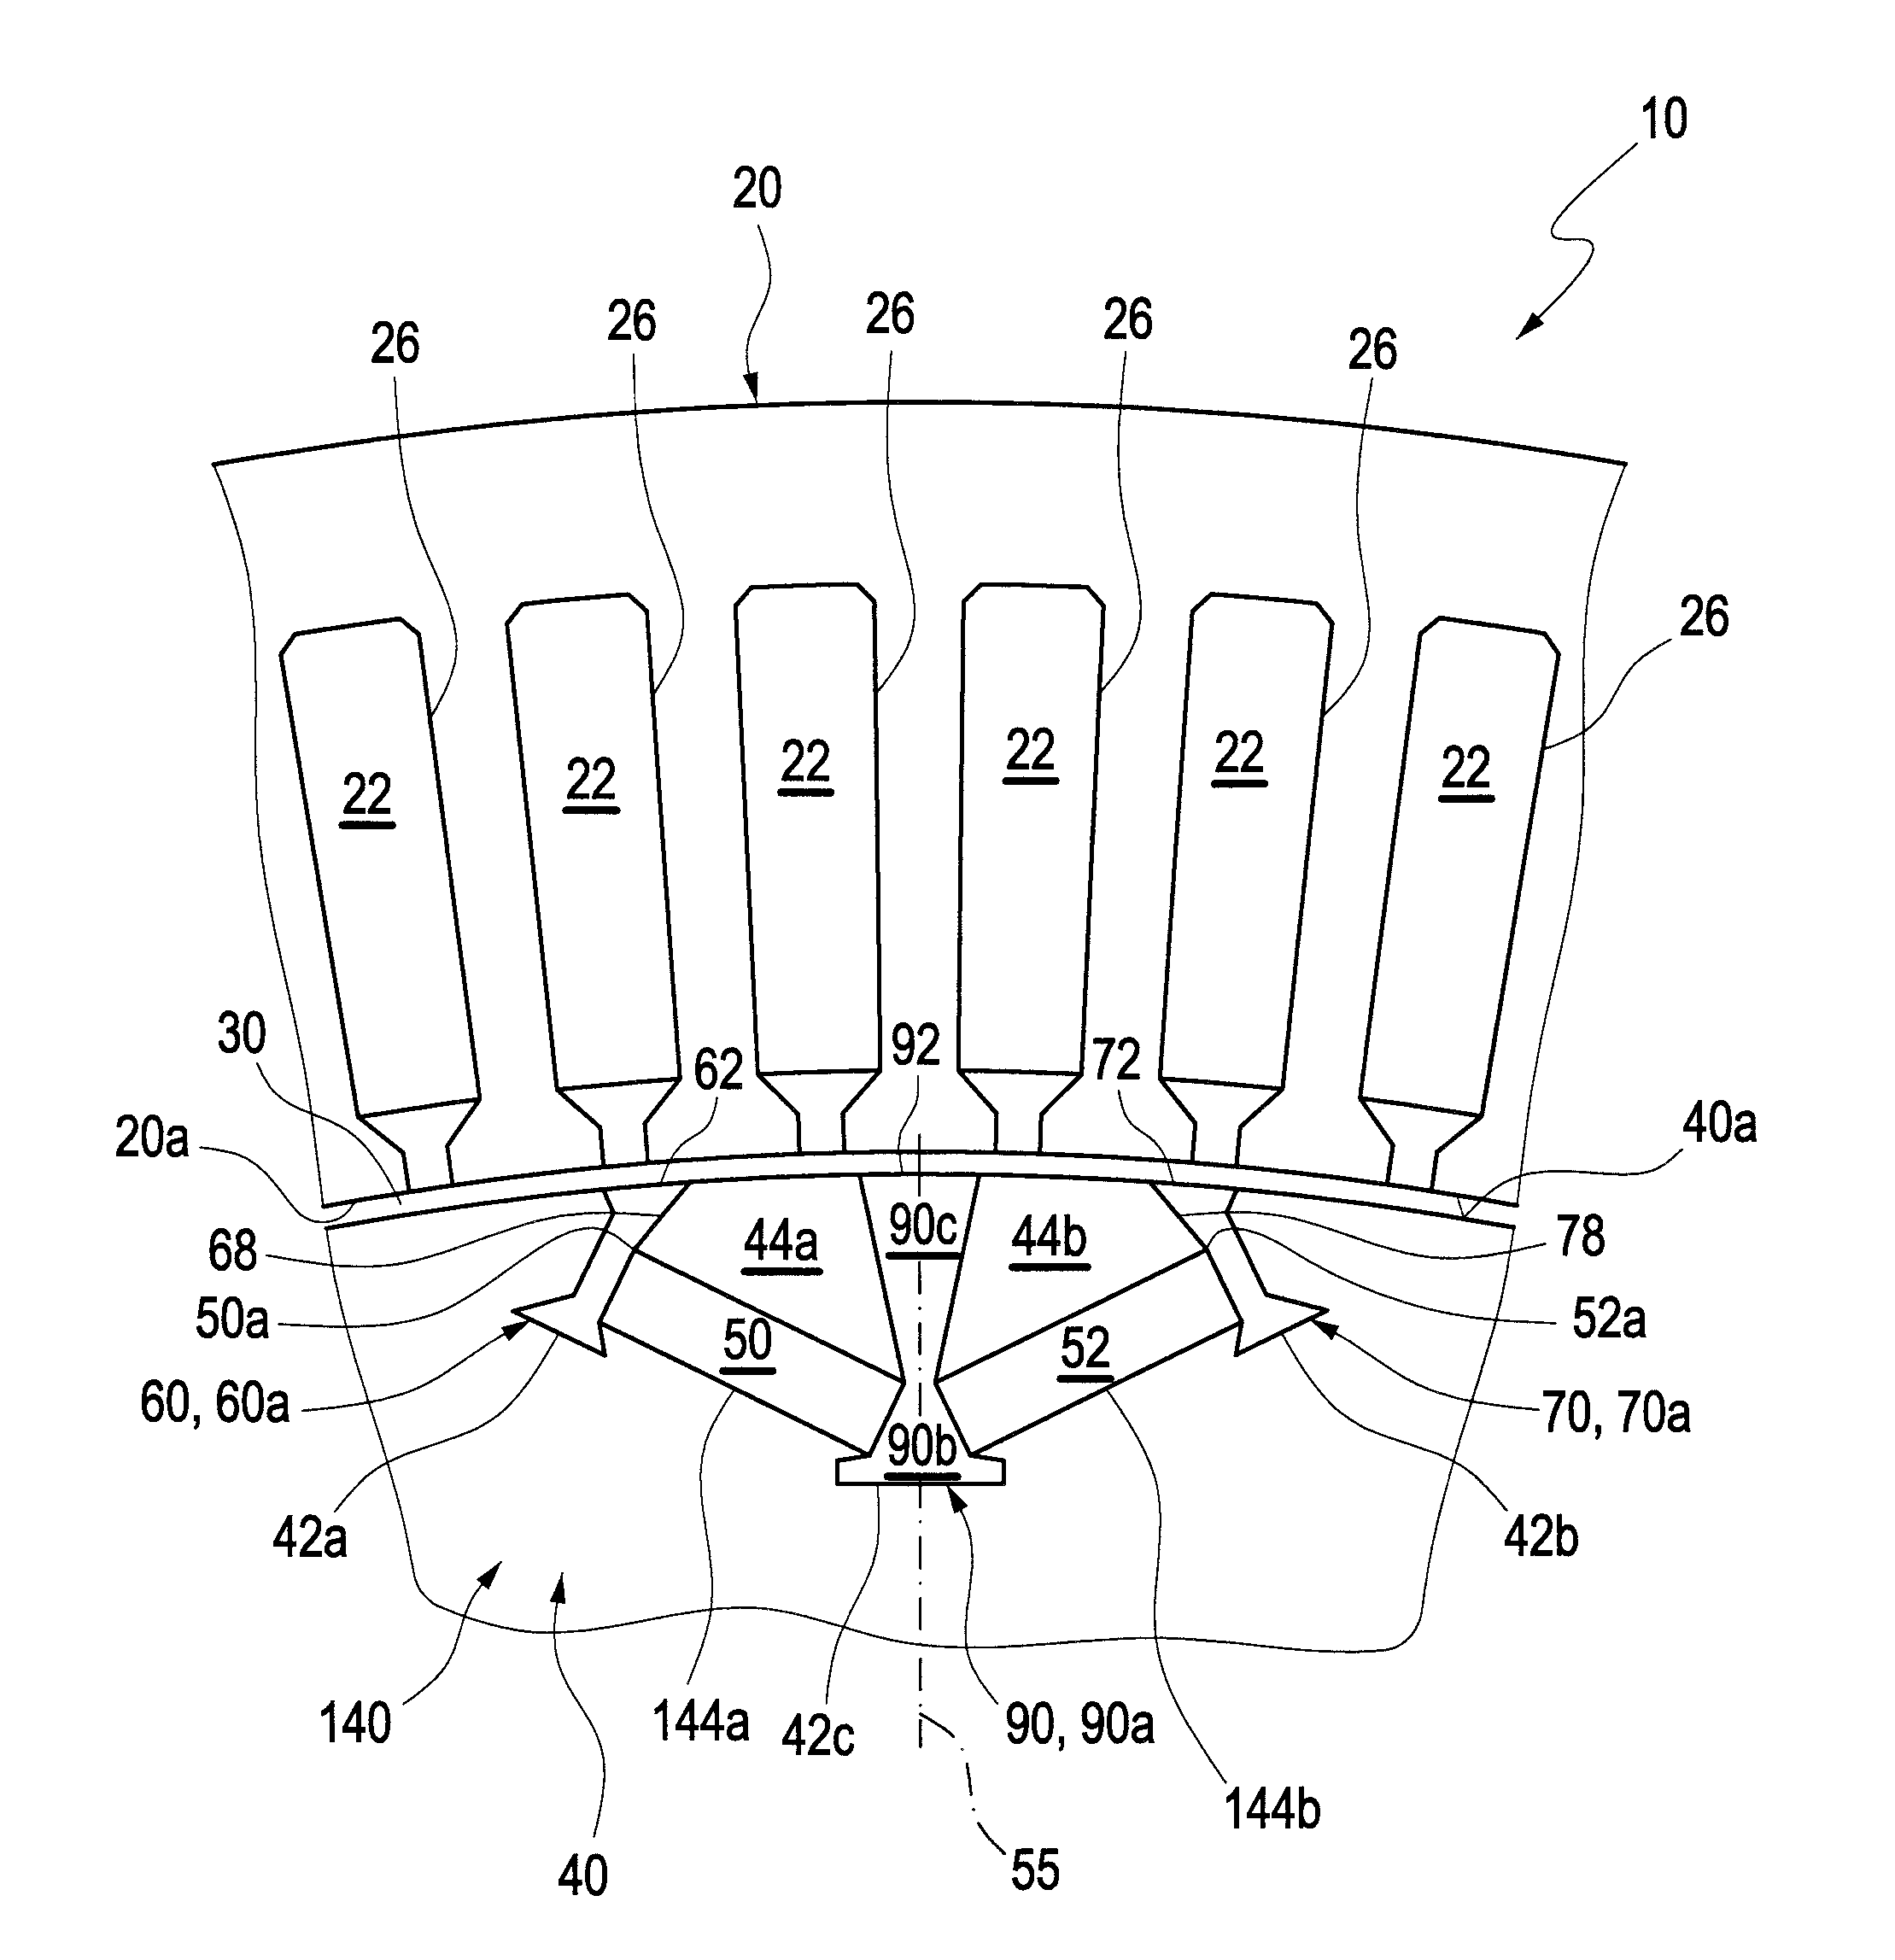 Rotor of an electric machine with embedded permanent magnets and electric machine